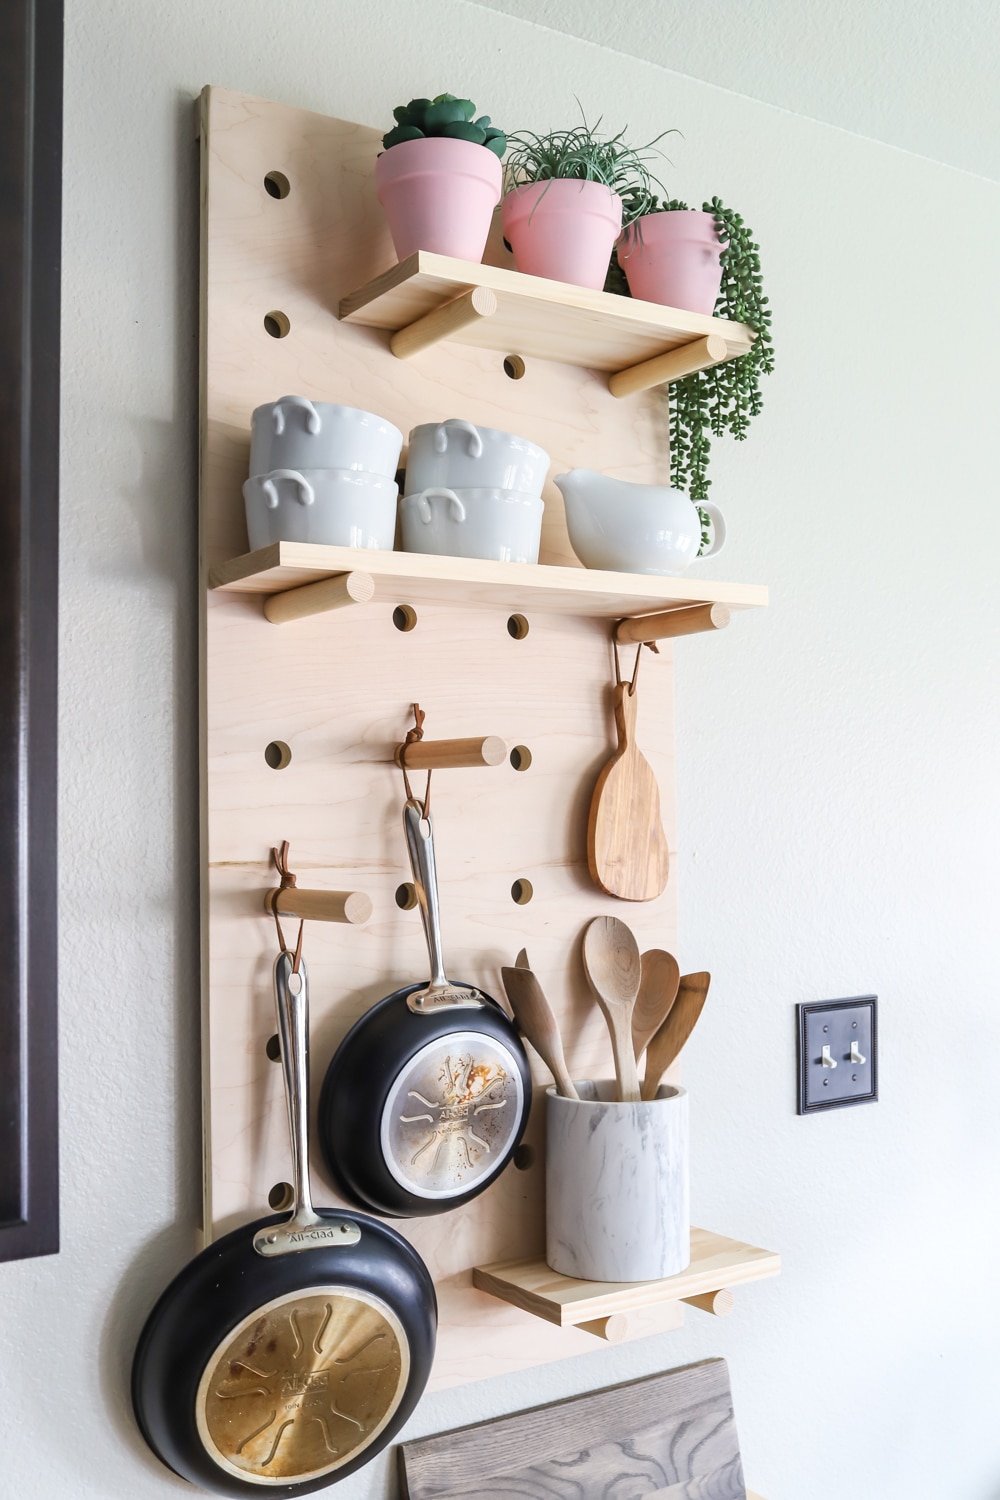 How to make a DIY pot rack from oversized pegboard shelves